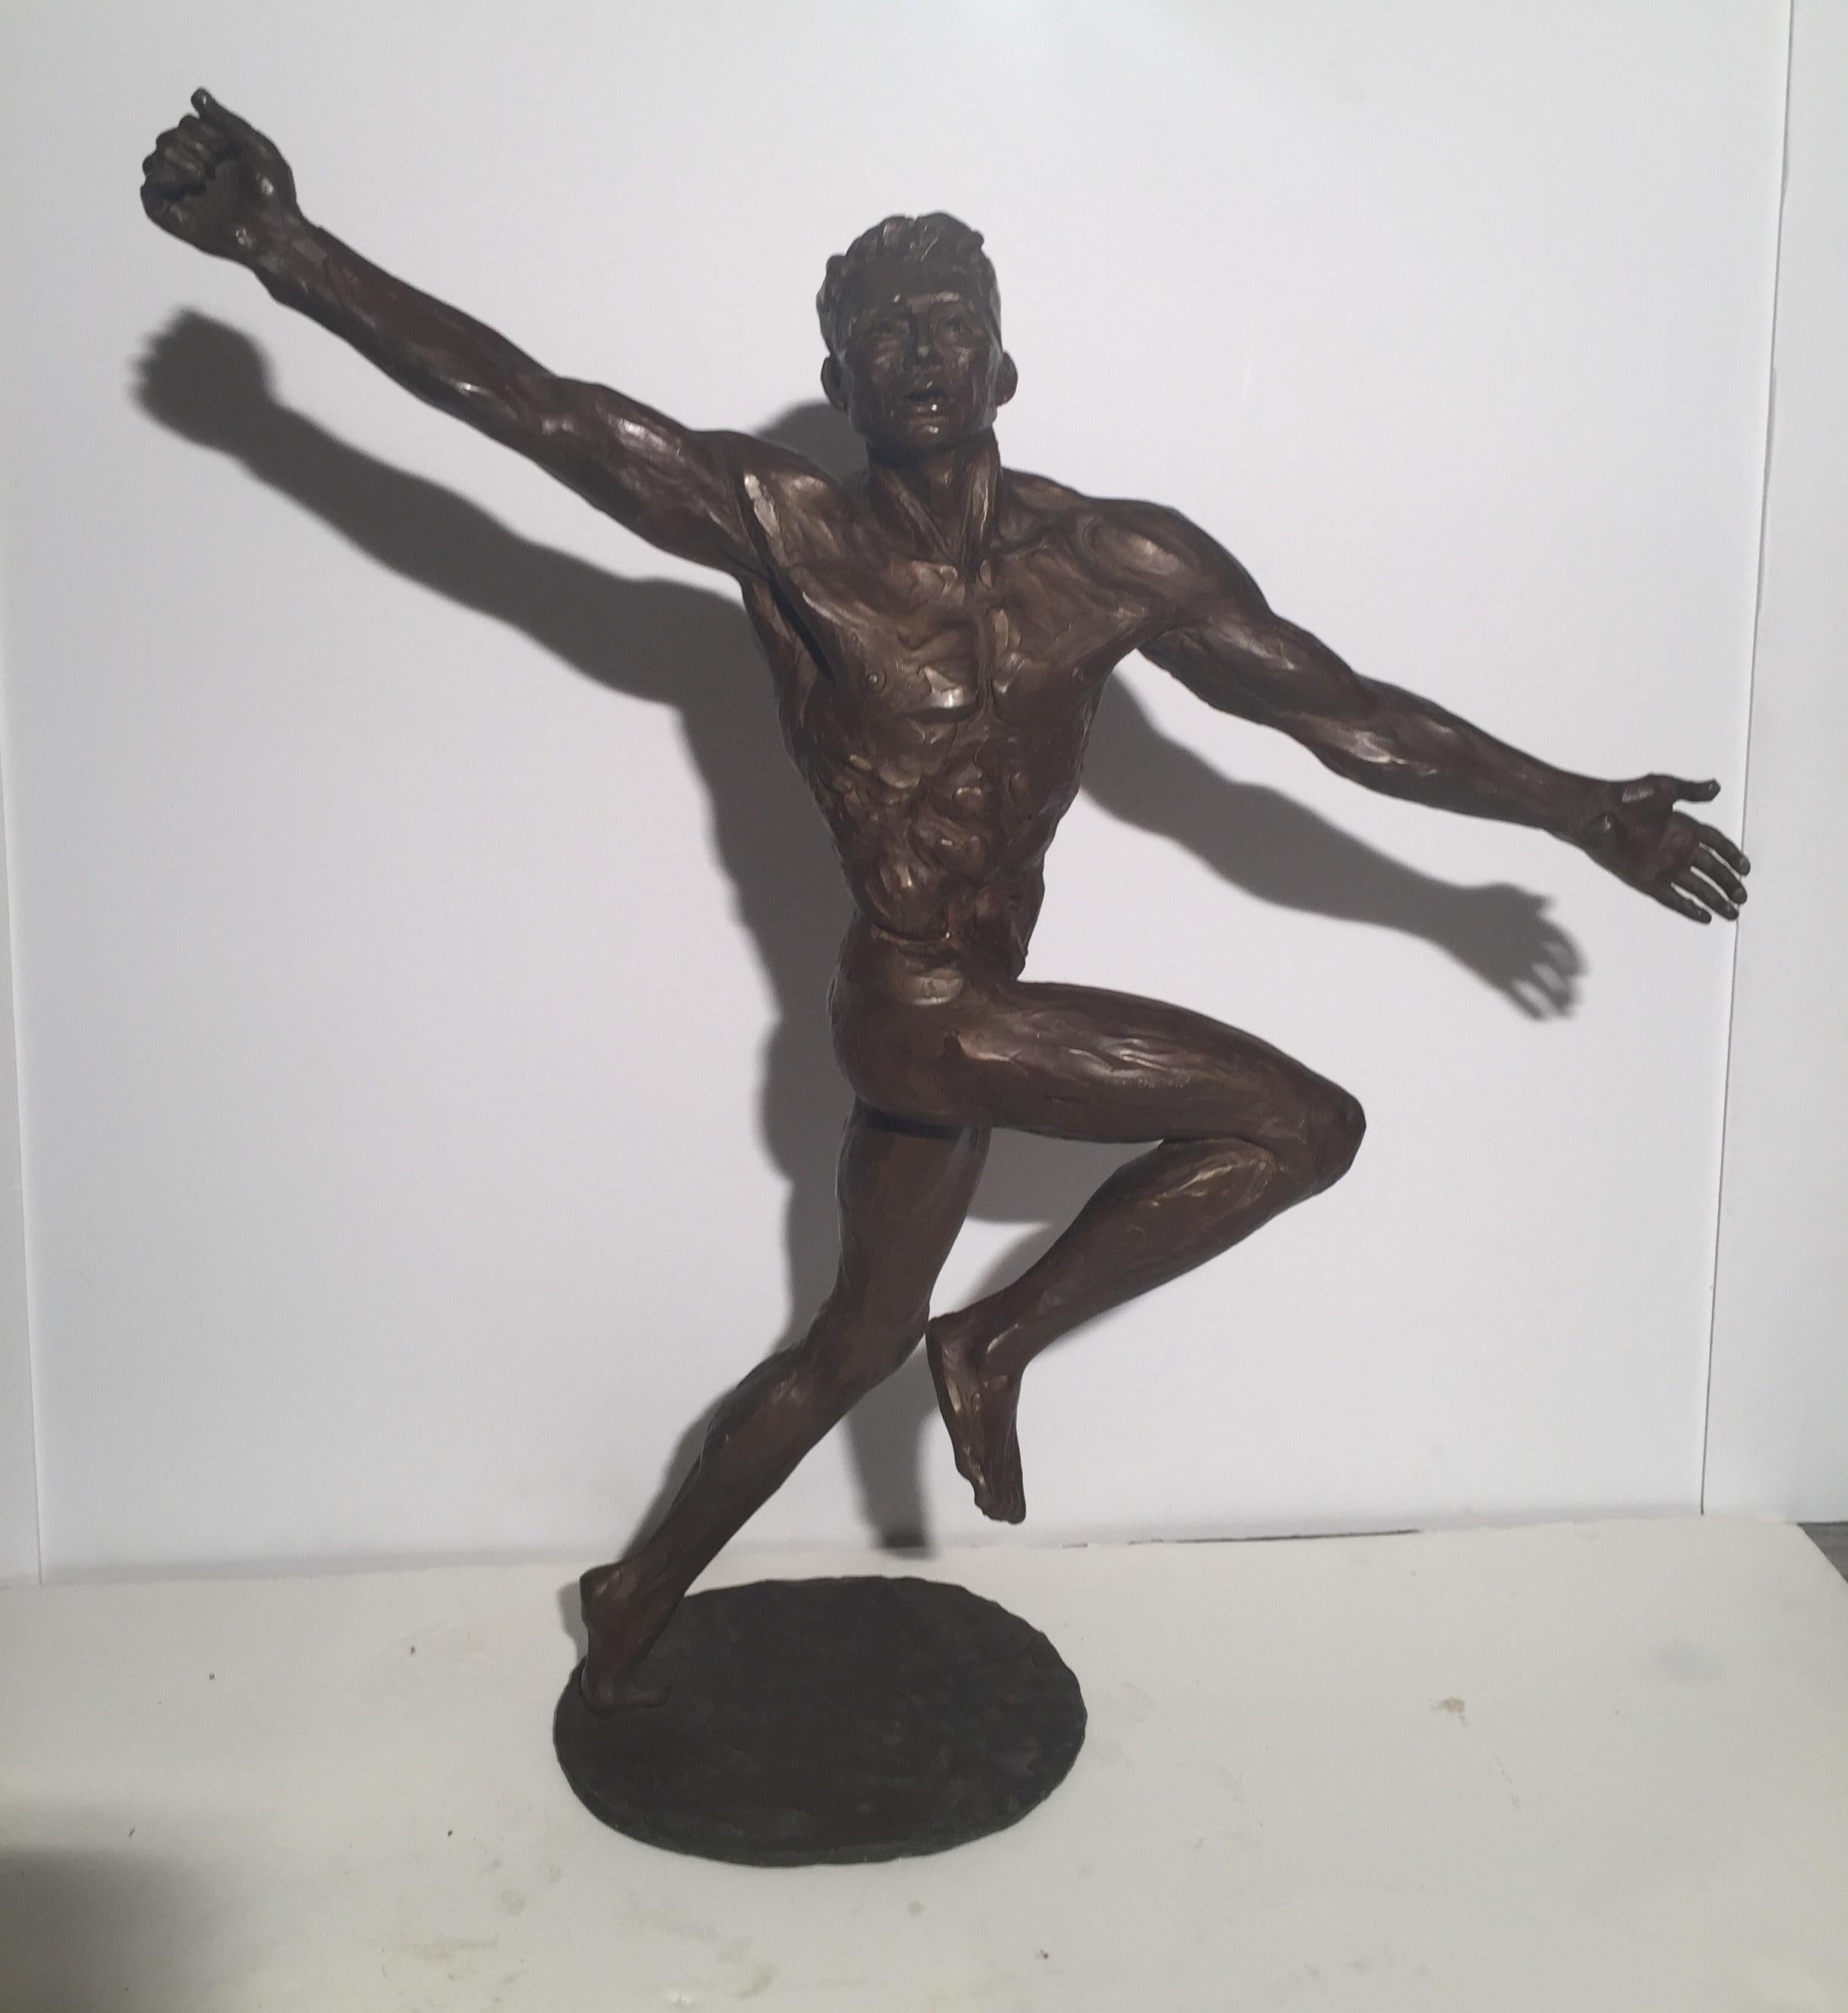 A powerful modernist bronze sculpture of an Athletic male nude signed at base John Jones. The figure with raised arm and running stance on a circular signed bronze base.